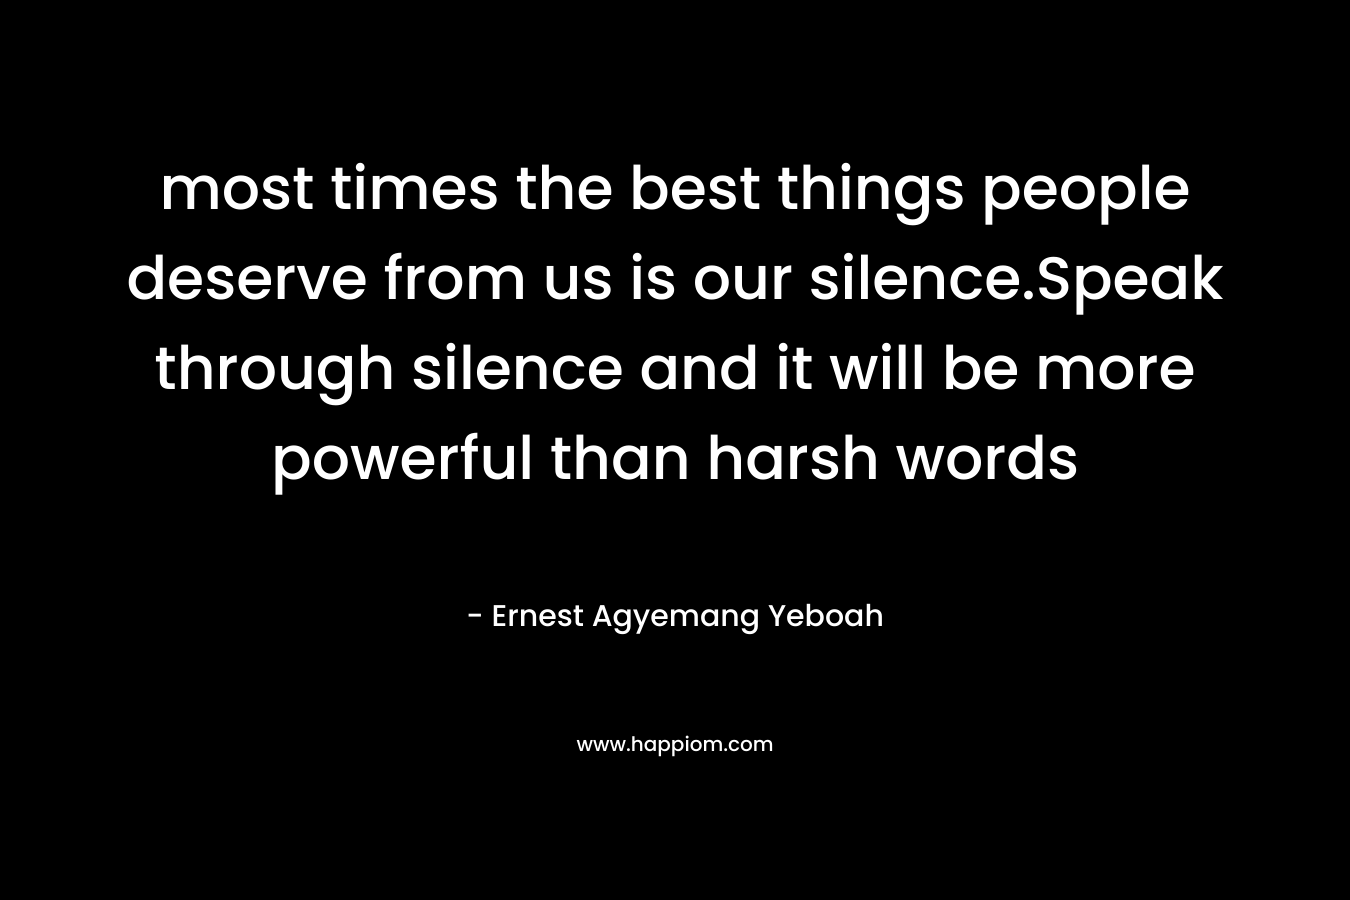 most times the best things people deserve from us is our silence.Speak through silence and it will be more powerful than harsh words